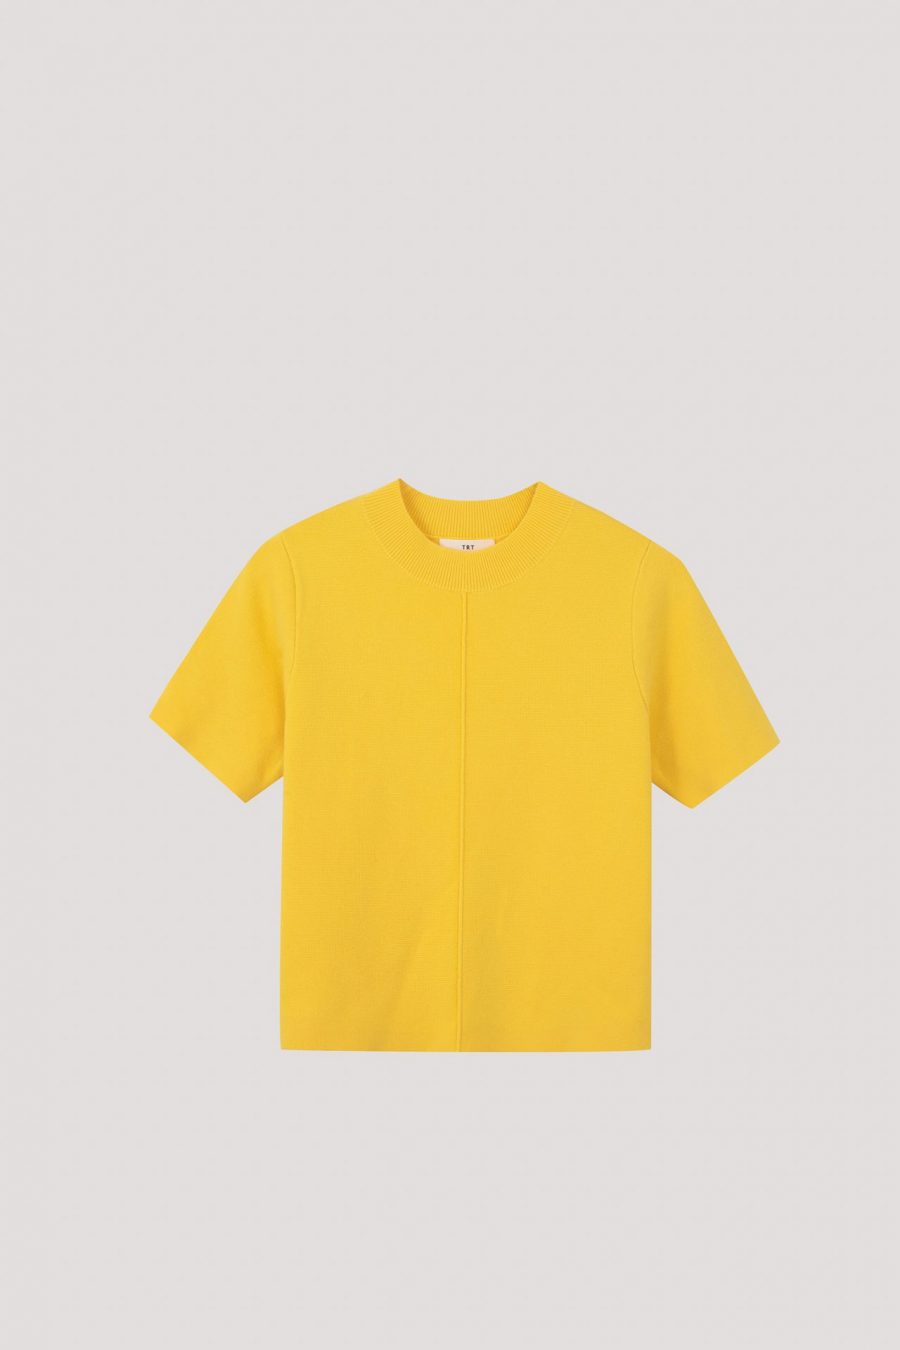 CK000307S CANARY